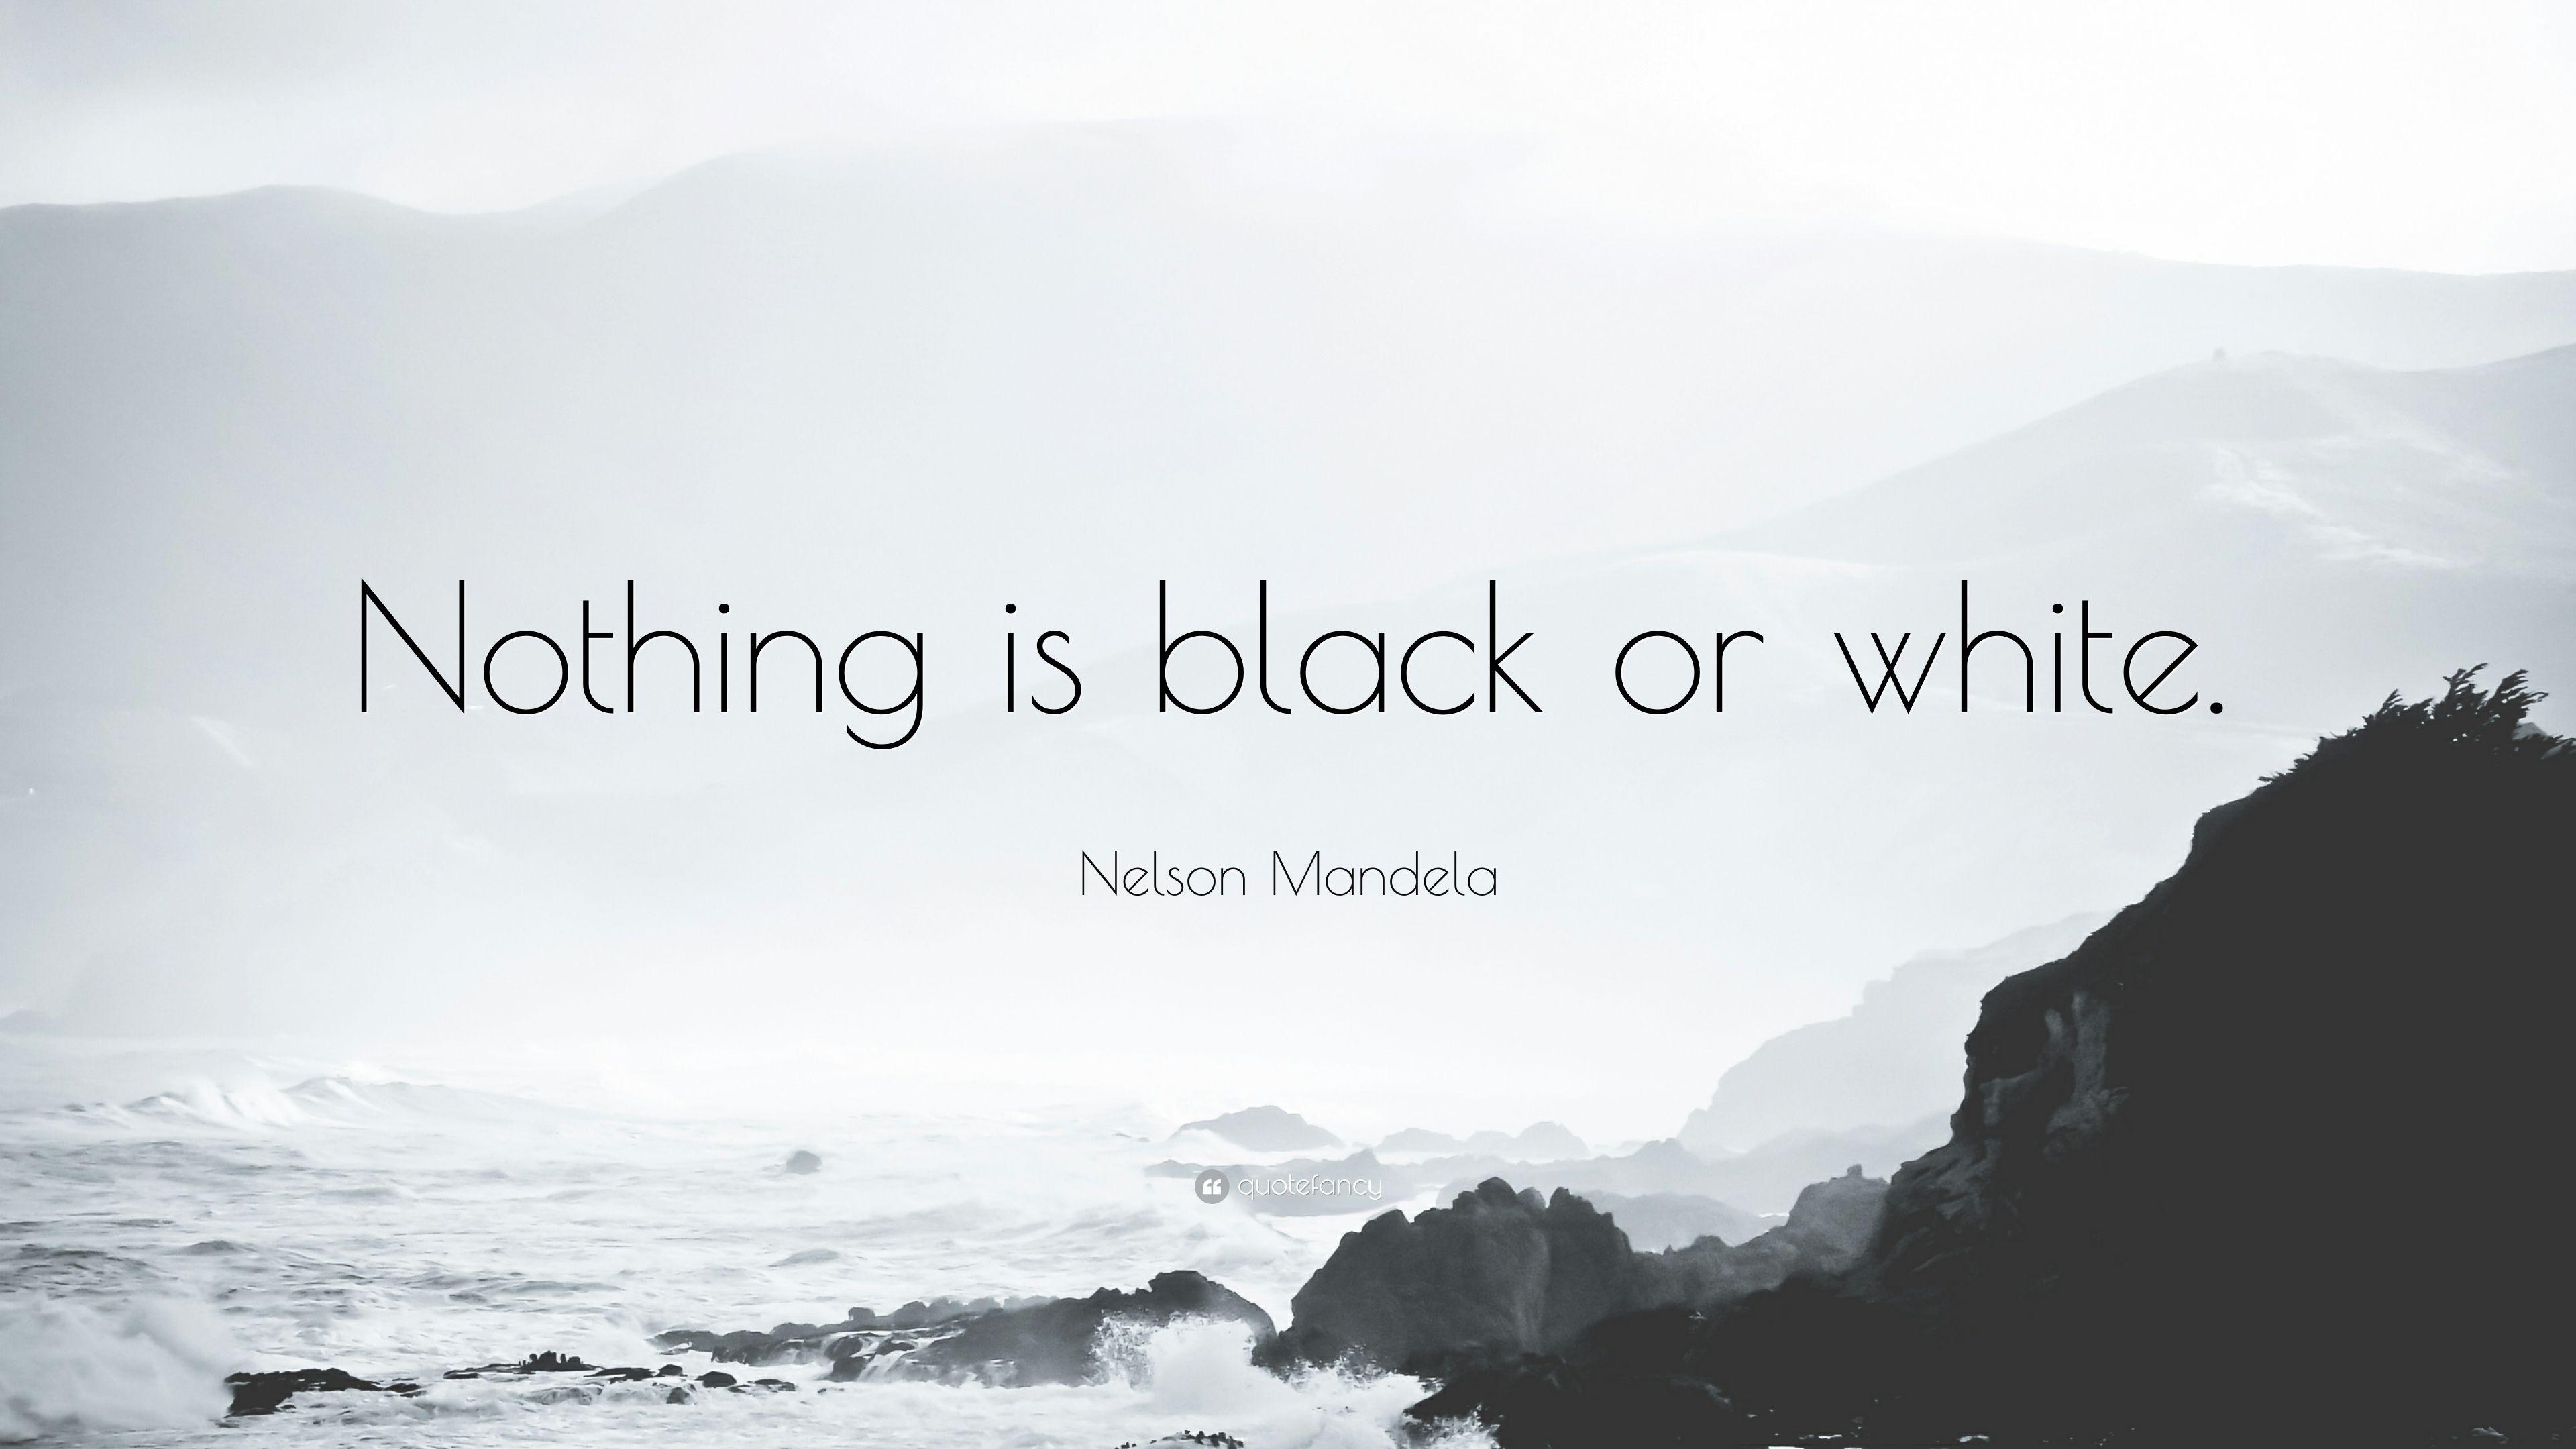 Nelson Mandela Quote: “Nothing is black or white.” 11 wallpaper